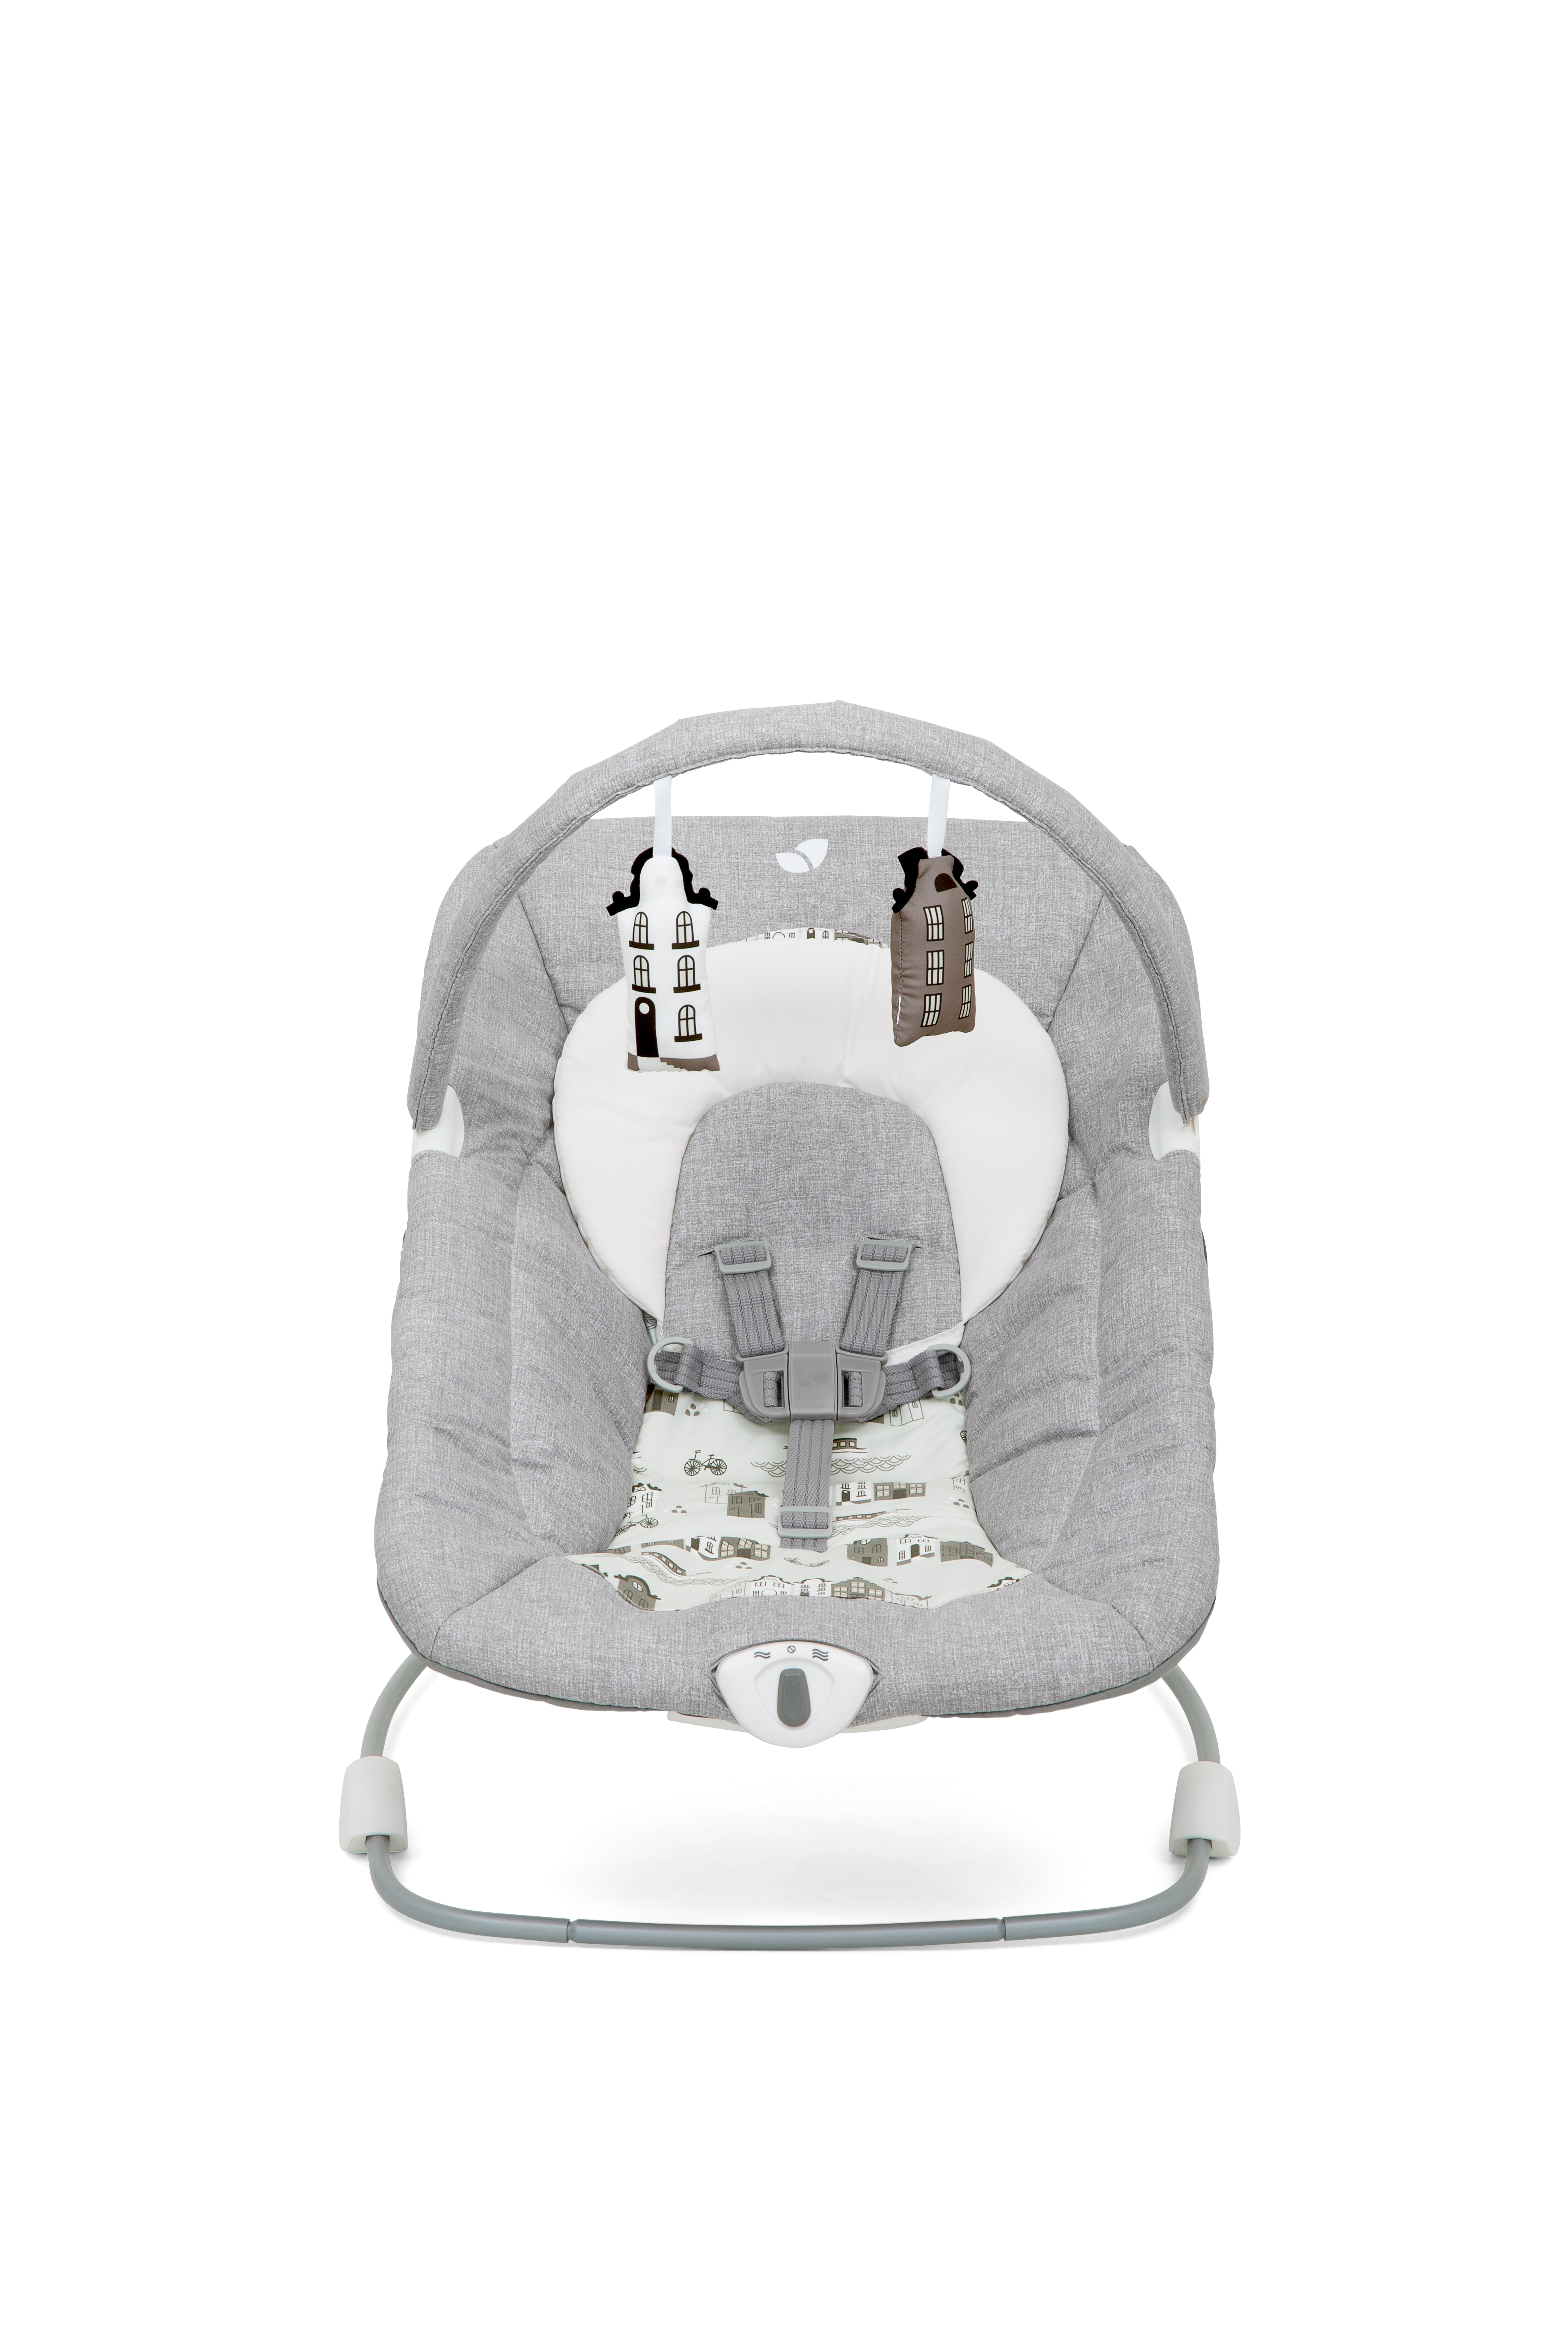 JOIE | Joie Soother Bouncer Wish Petite City